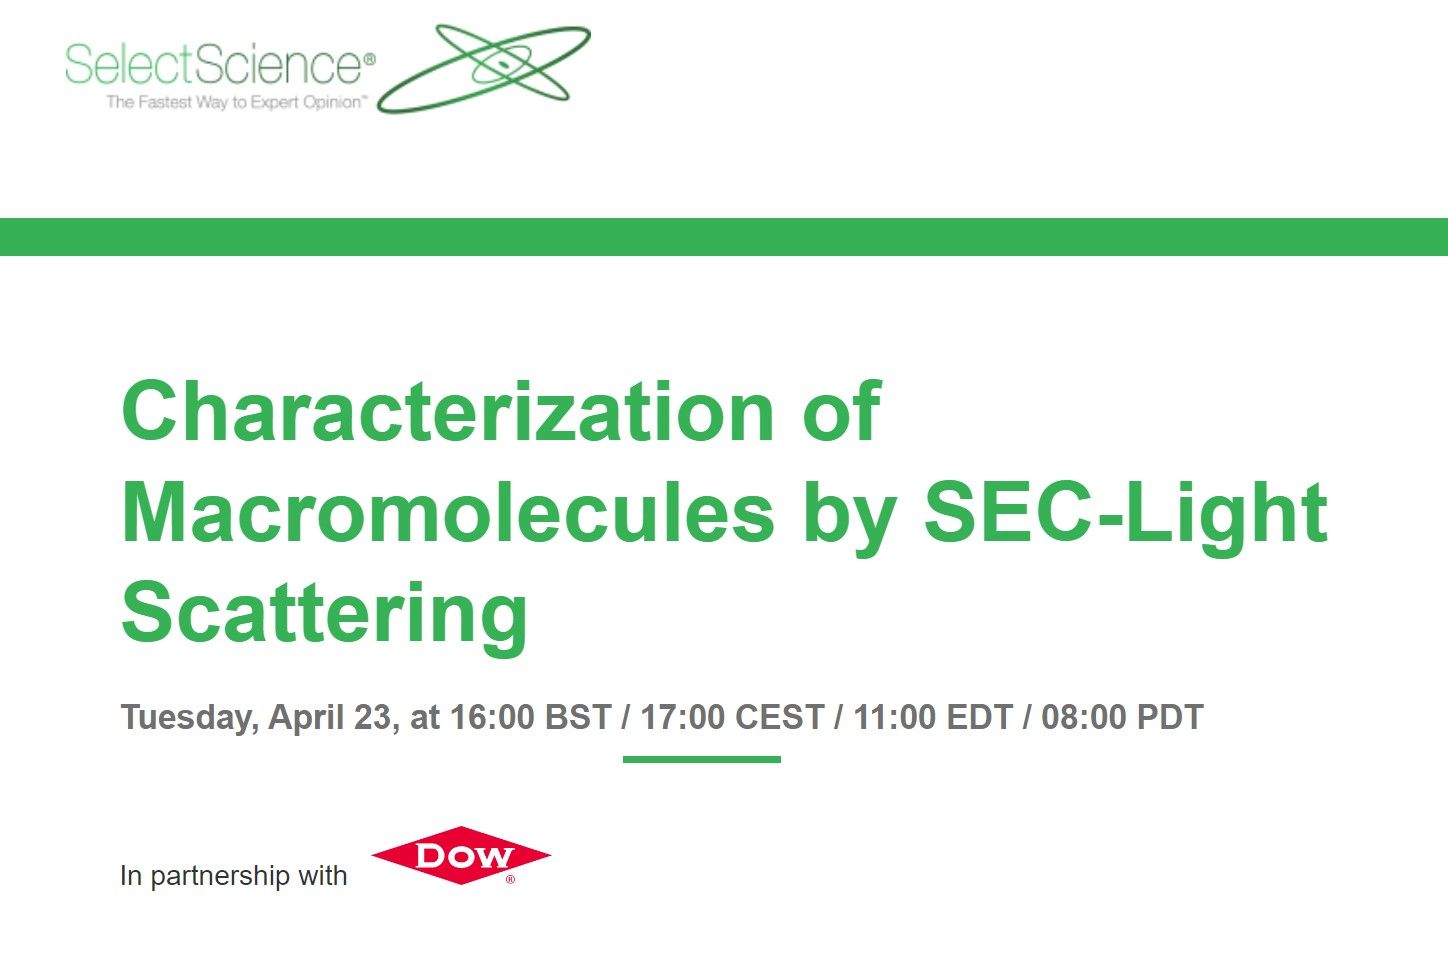 SelectScience: Characterization of Macromolecules by SEC-Light Scattering